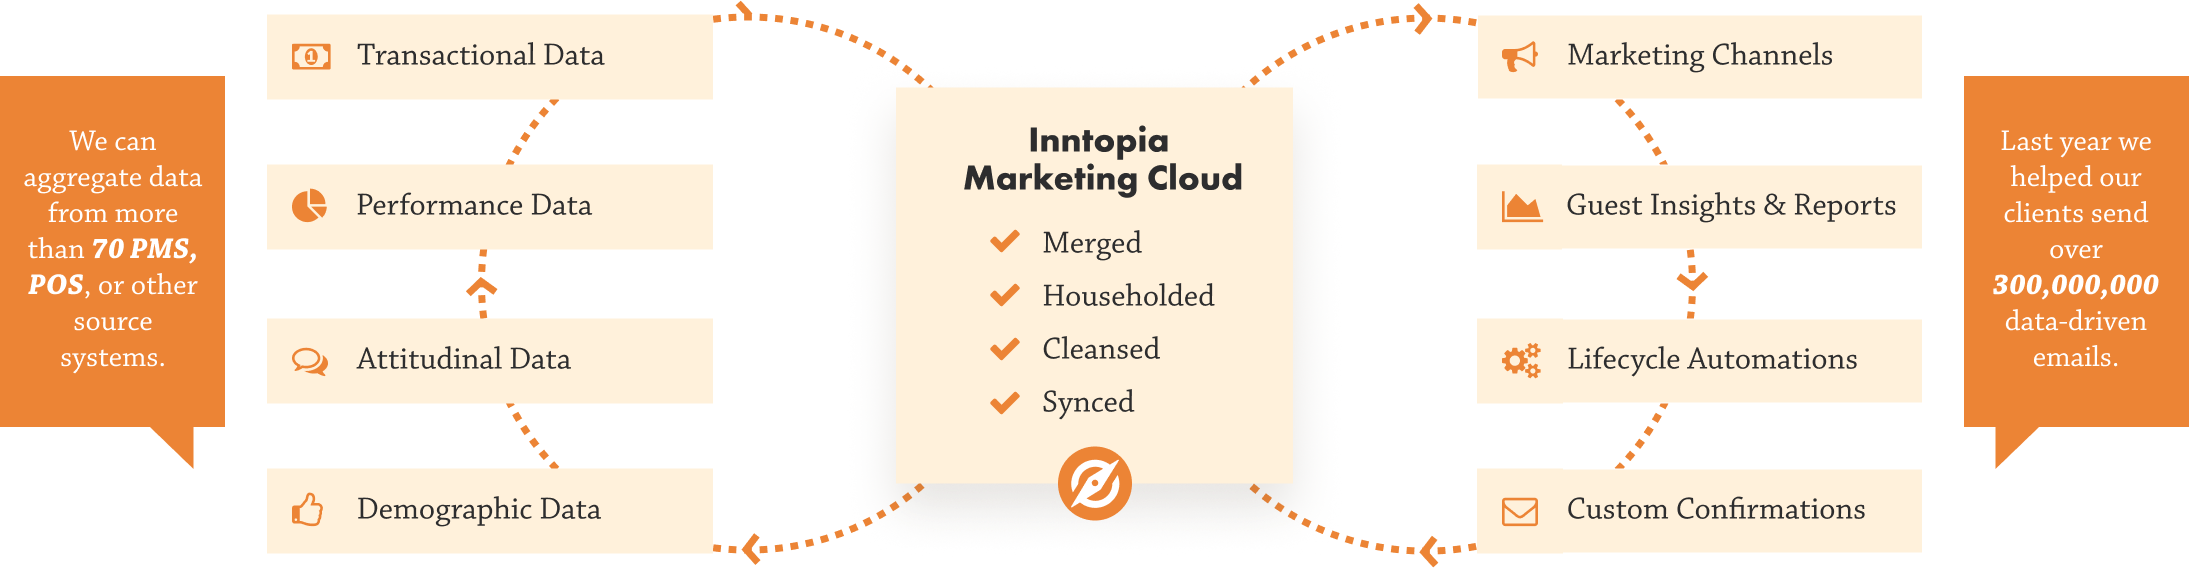 chart showing how data flows through inntopia hotel CRM system